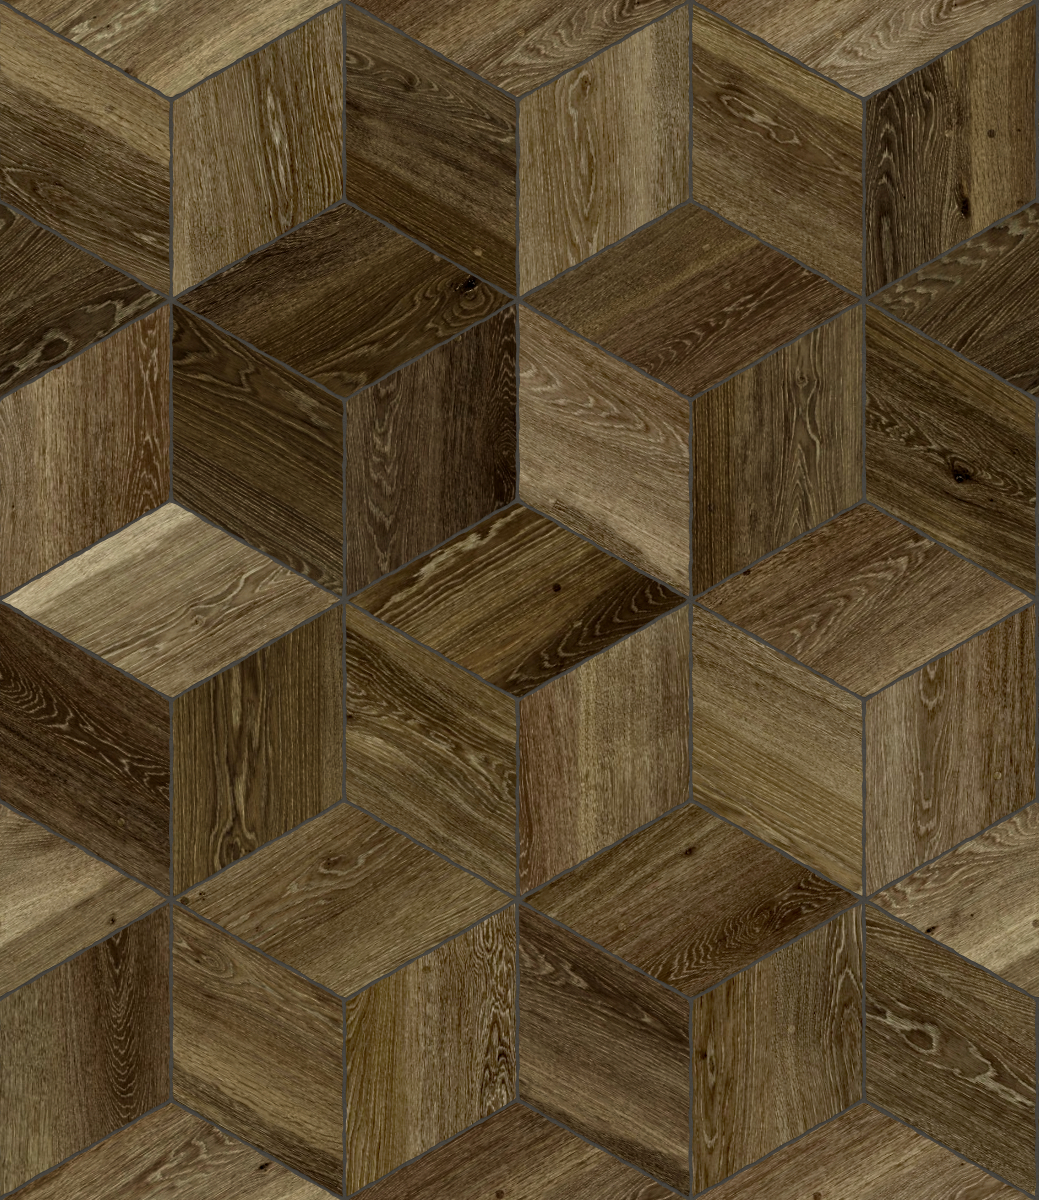 A seamless wood texture with stained timber boards arranged in a Cubic pattern